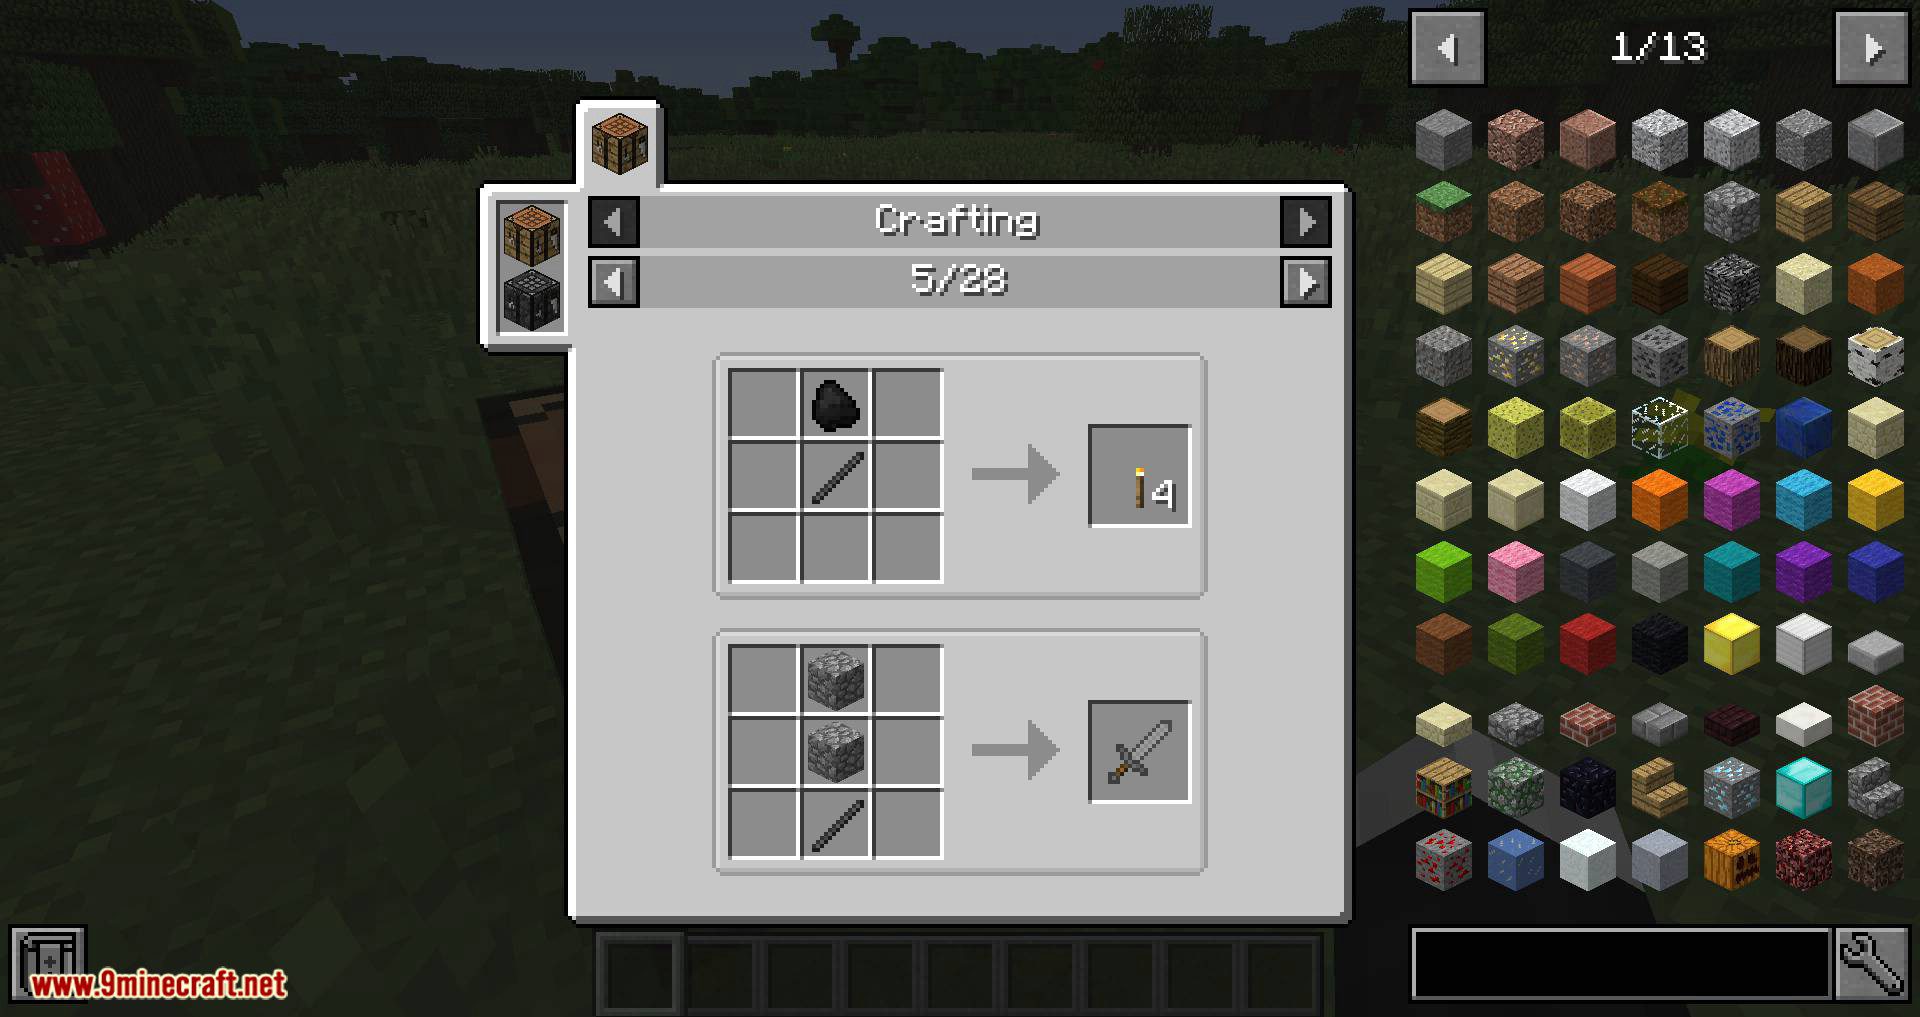 Stone Crafting Table Mod 2222.22222222.2222/2222.222222.22 (Stone Version of the